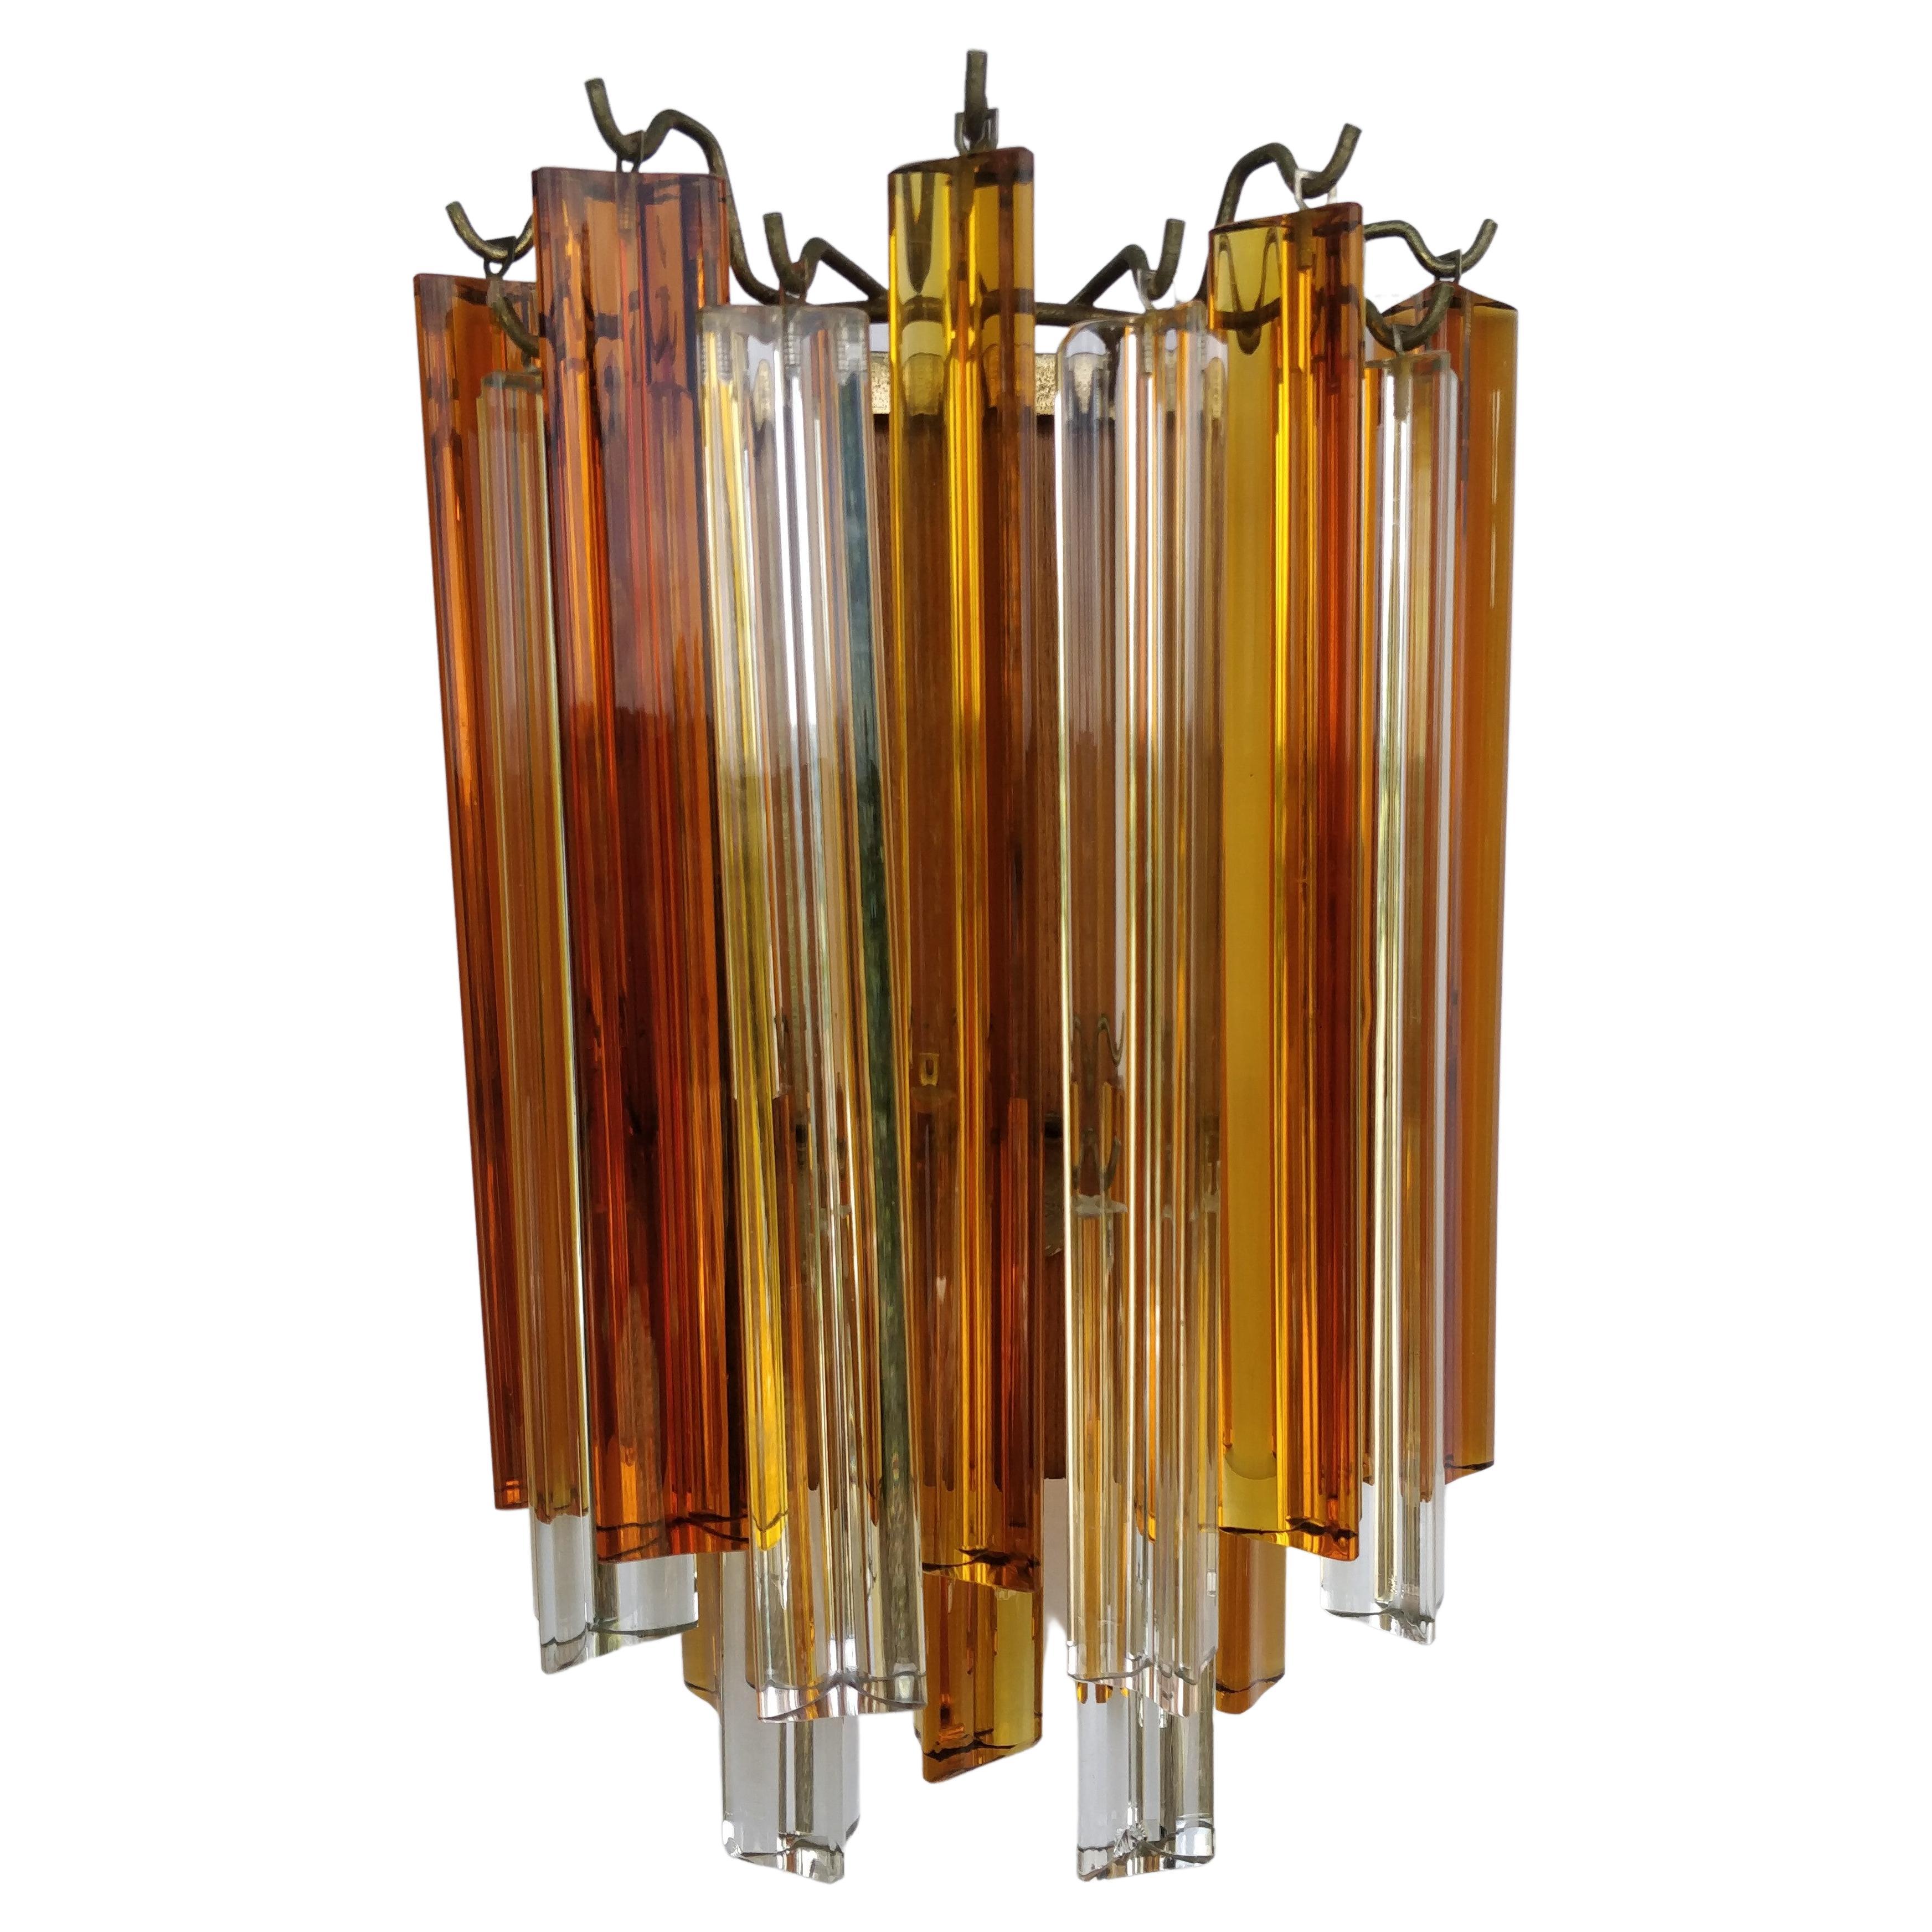 Pair of vintage Venini wall sconces Murano glass 1970s orange and white.
Made by 14 prism triedri.
The total dimension is  H 37 x 24 cm
Perfect condition and fully workig; normal and slight signs of wear on the structure, glass in perfect